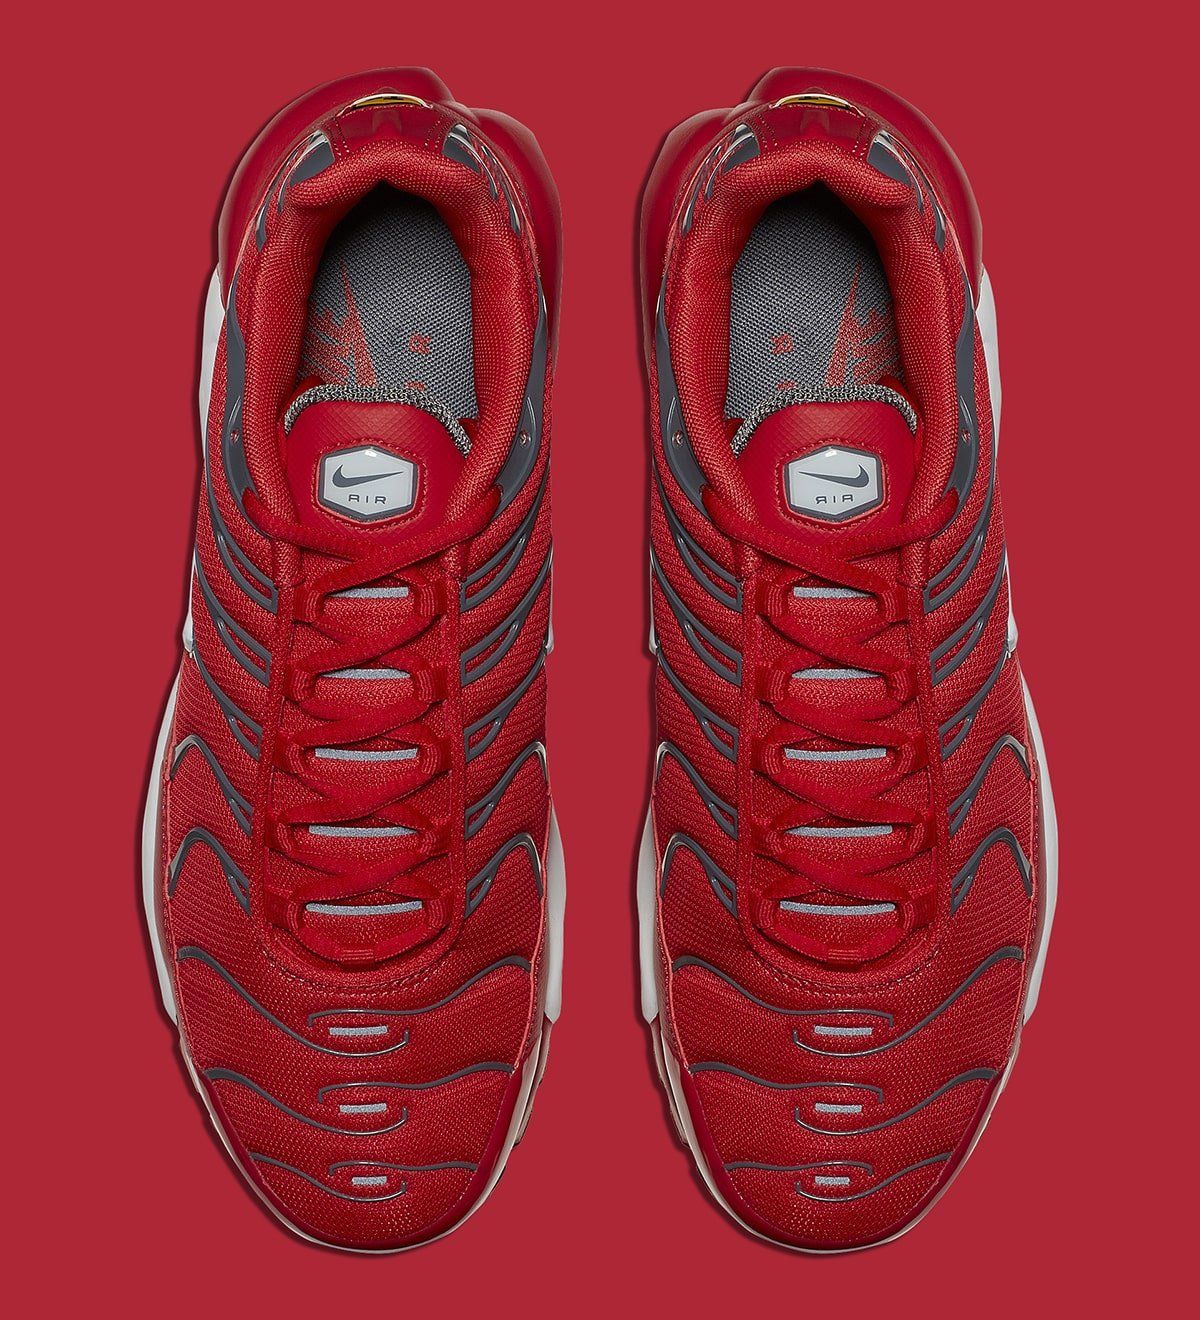 Available Now // Nike Air Max Plus in 